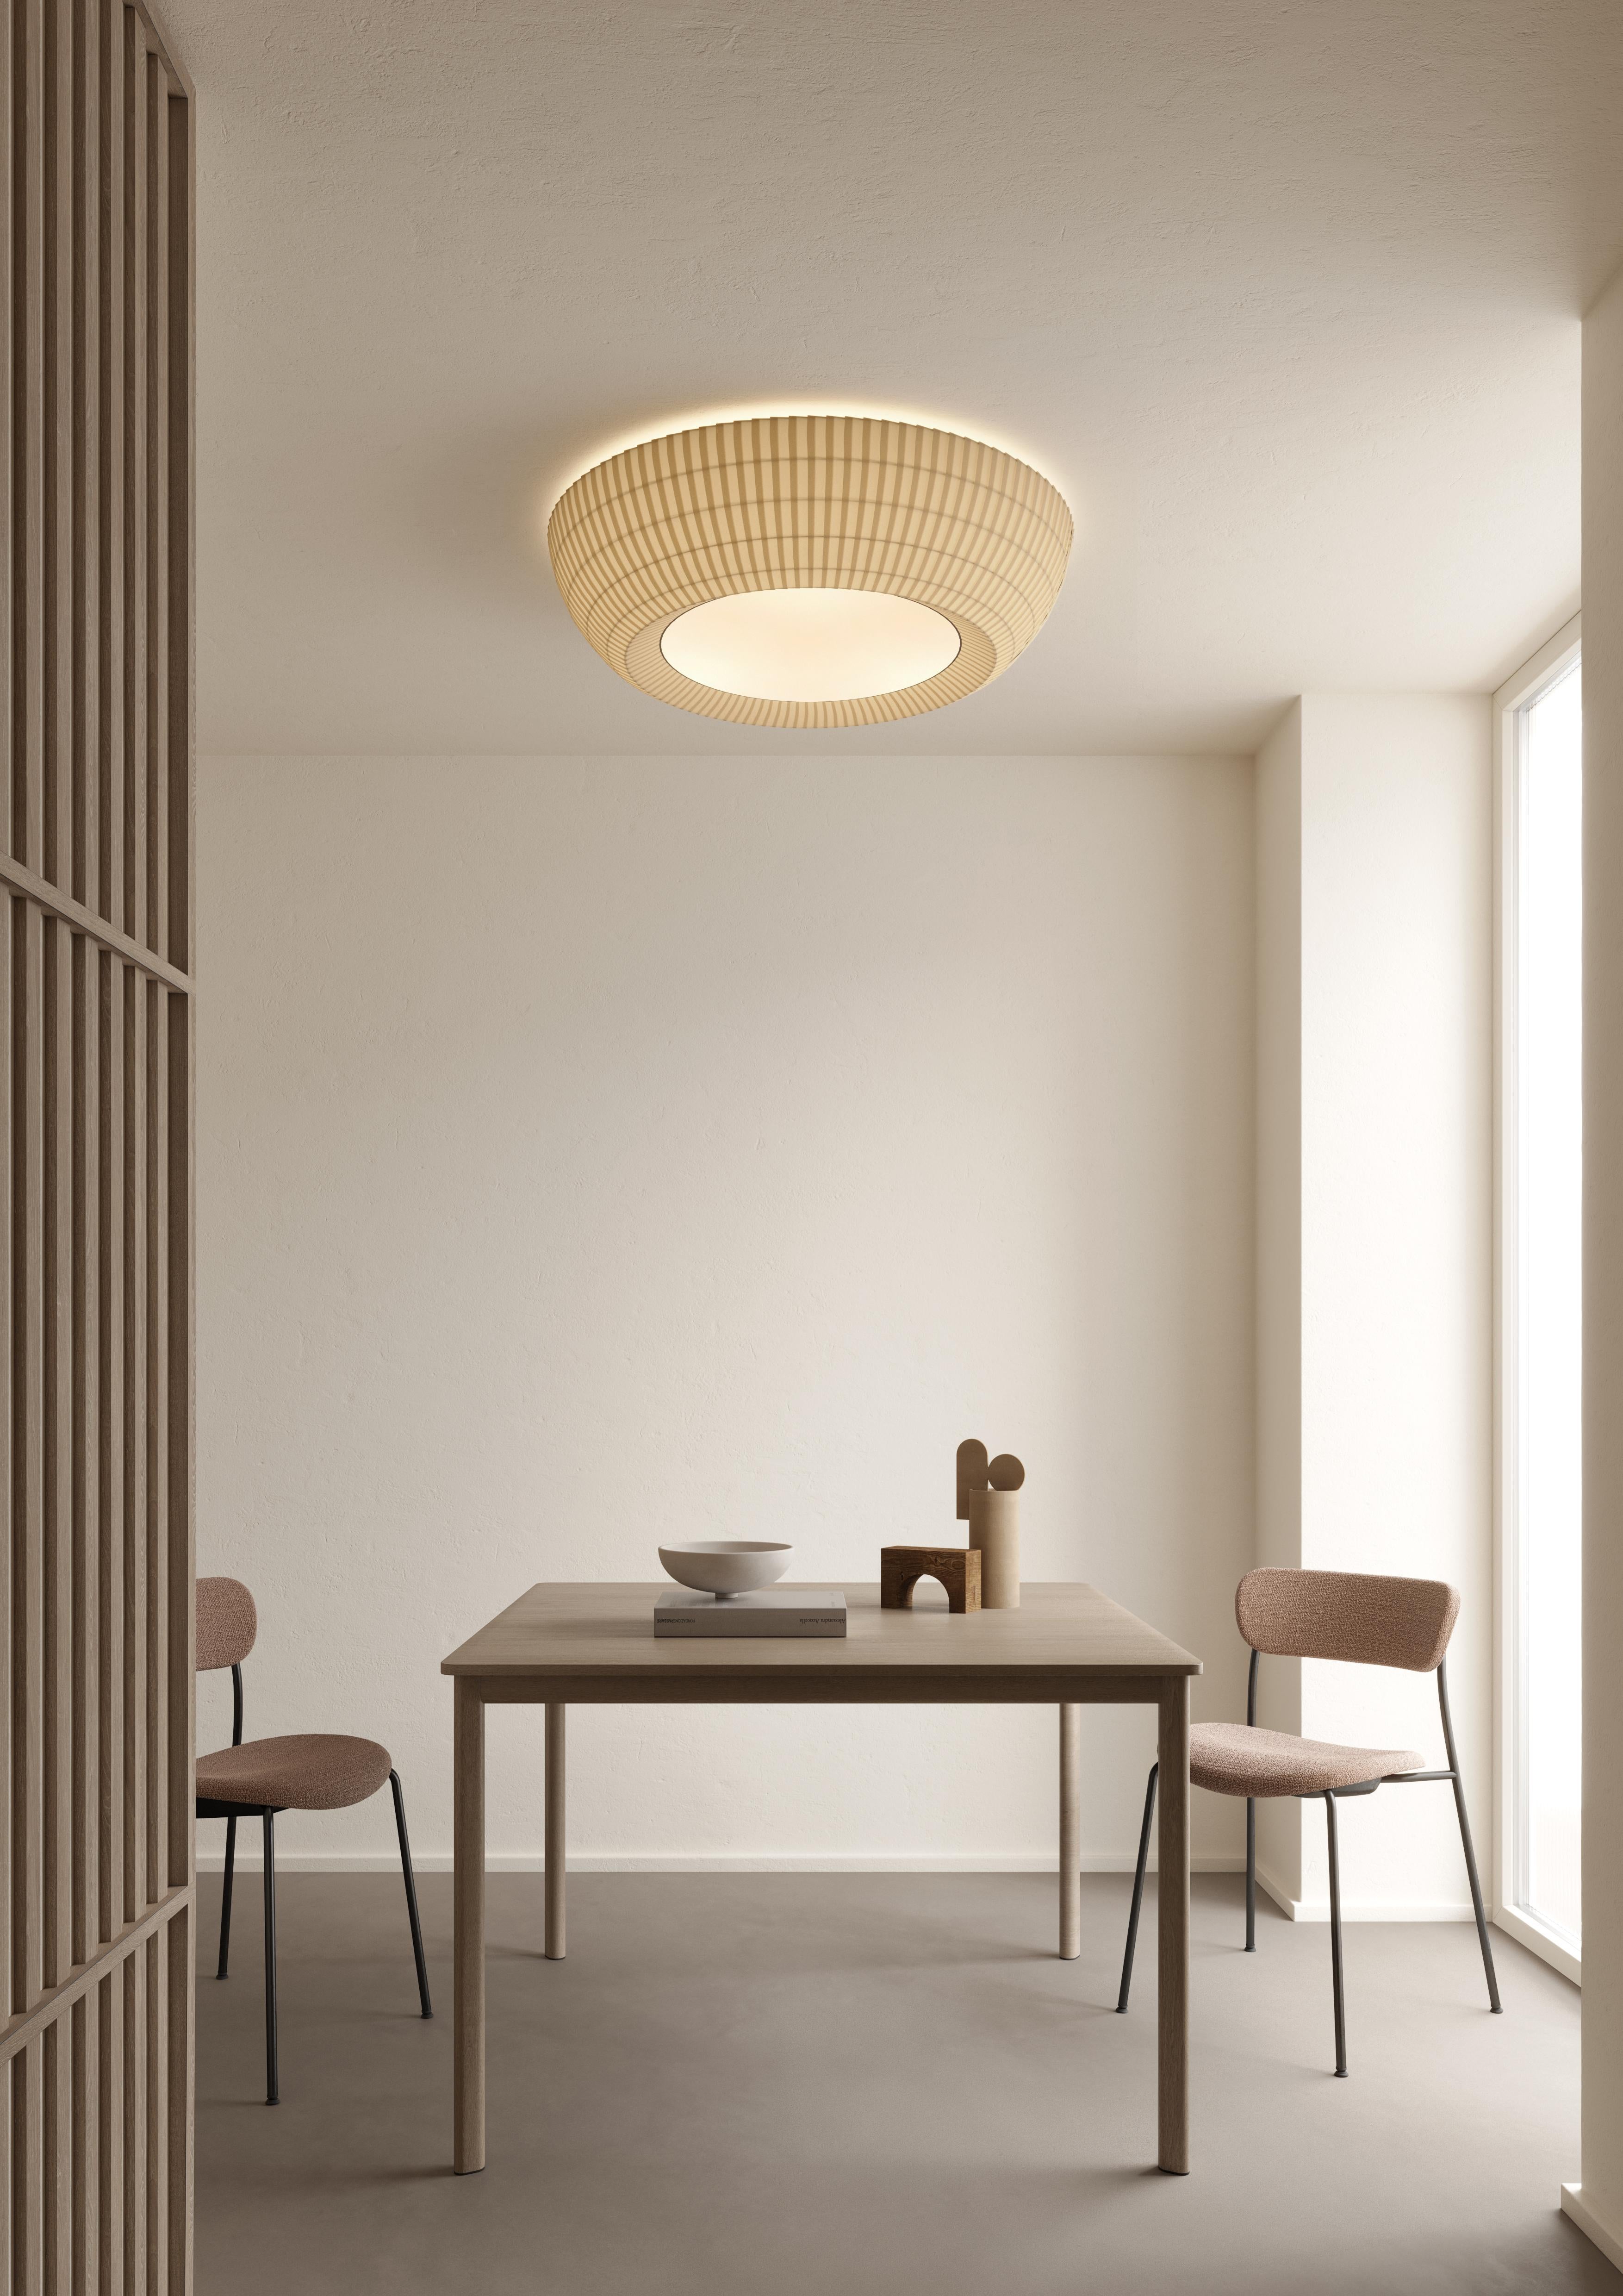 Axolight Bell Medium Flush Mount/ Ceiling Lamp in Red by Manuel & Vanessa Vivian

The ceiling version of Bell is in continuity with the aesthetic of the pendant one. The lightness given by the fabric, the multidimensionality and the chromatic